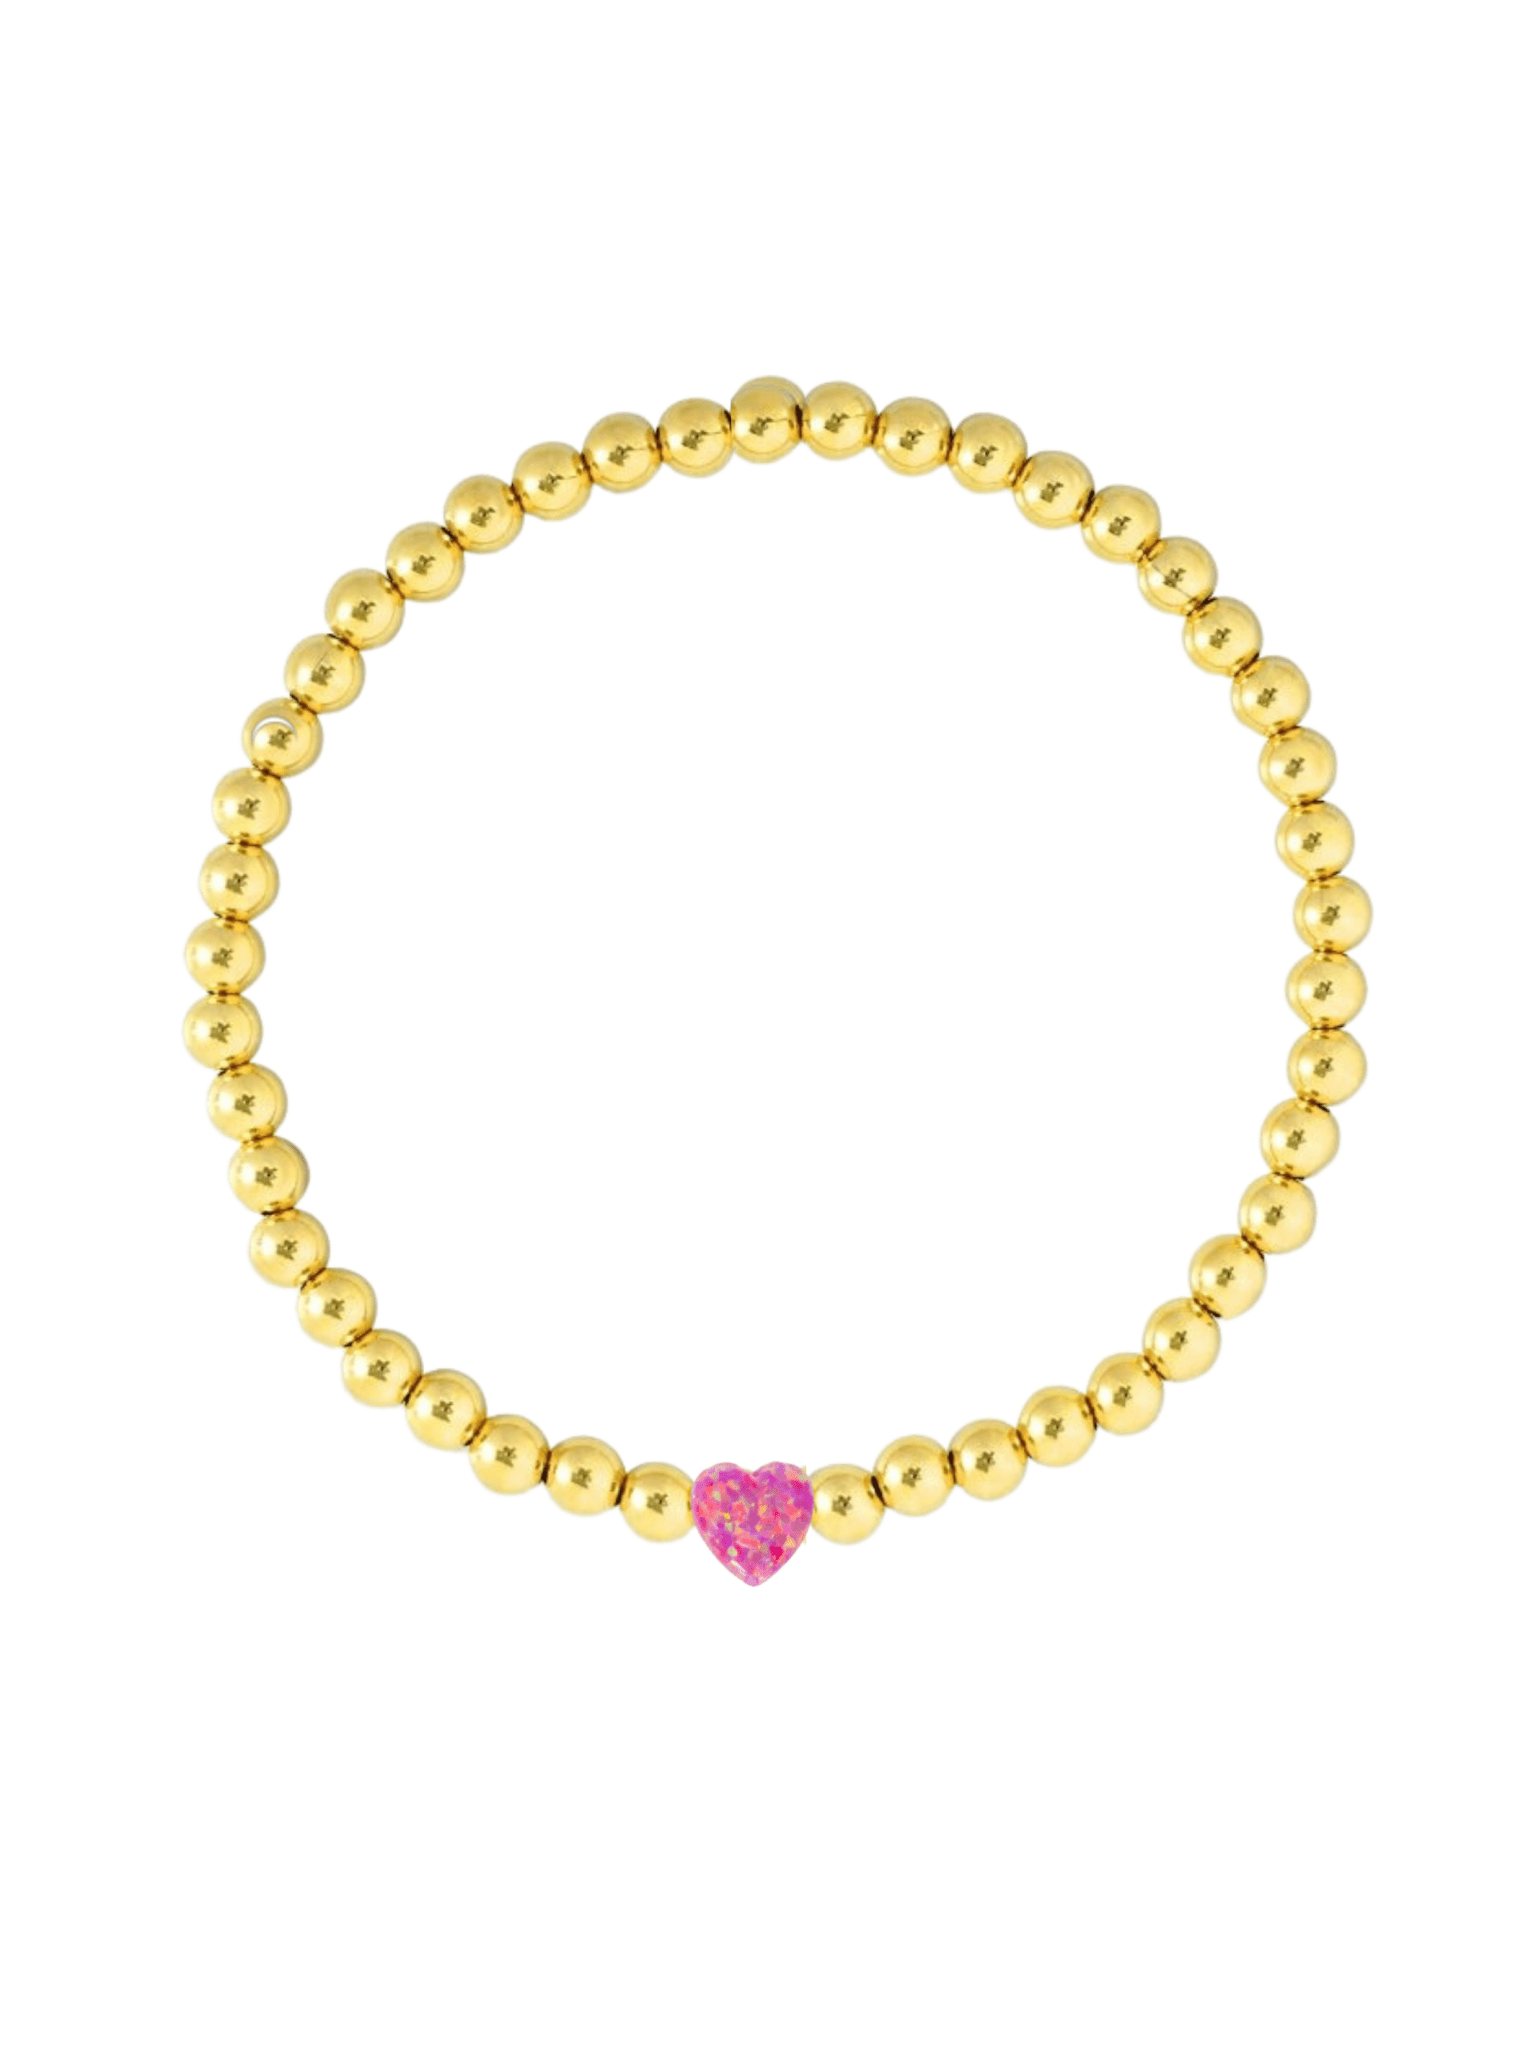 Buy BREAST CANCER Charm Bracelet With Hearts, Ambulance, nurses Call the  Shots and More Online in India - Etsy